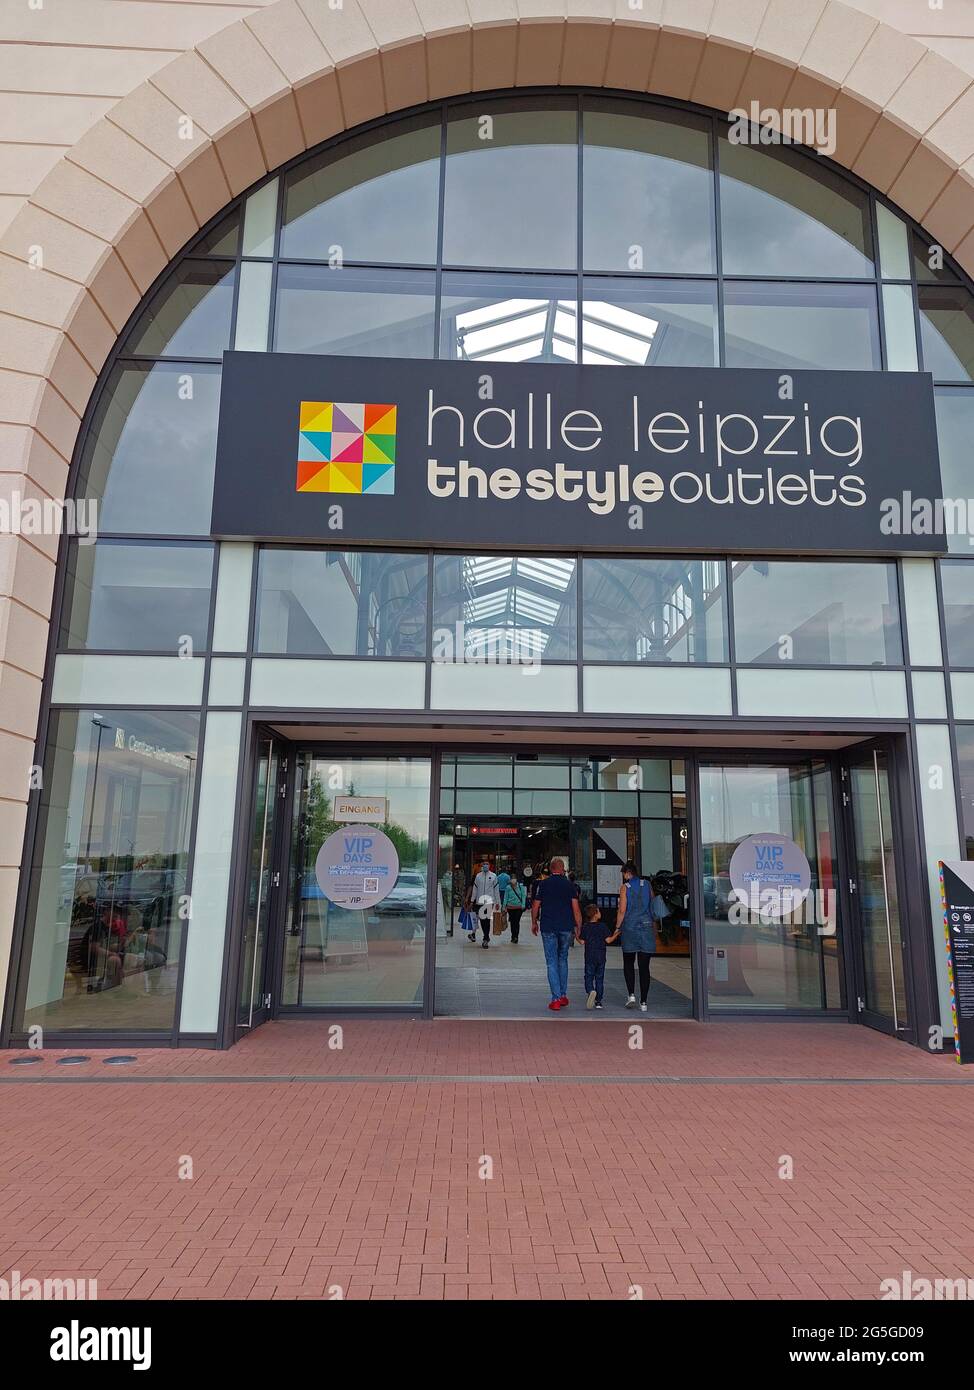 halle leipzig the style outlets entrance Stock Photo